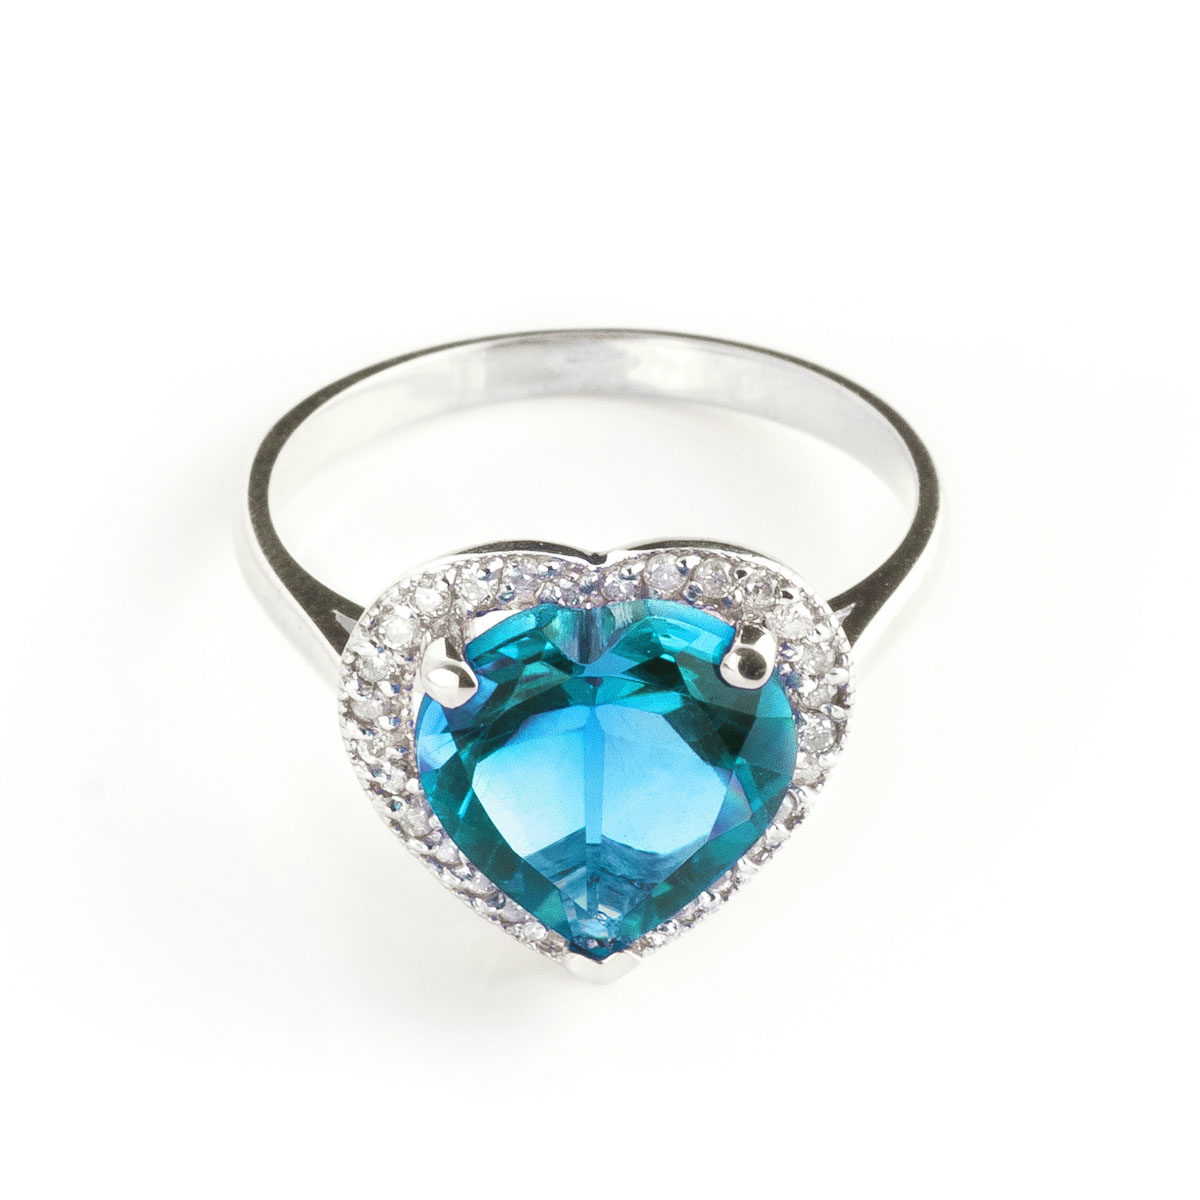 Blue Topaz Halo Ring 6.44 ctw in Sterling Silver